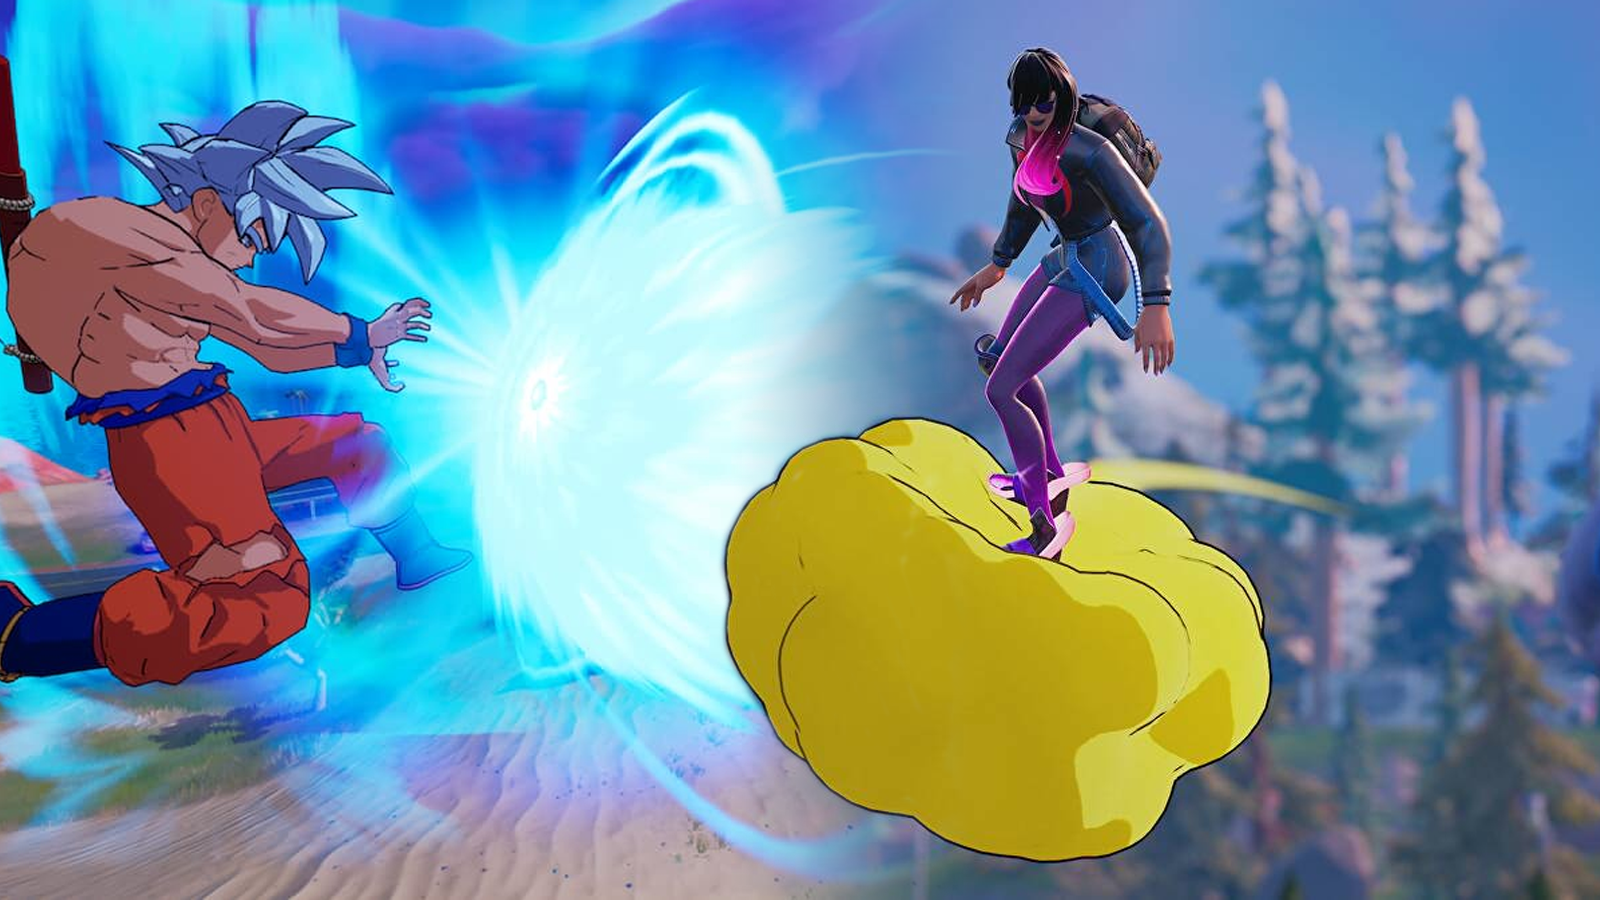 Fortnite Is Now A Dragon Ball Z Anime Shitstorm (And I Love It)